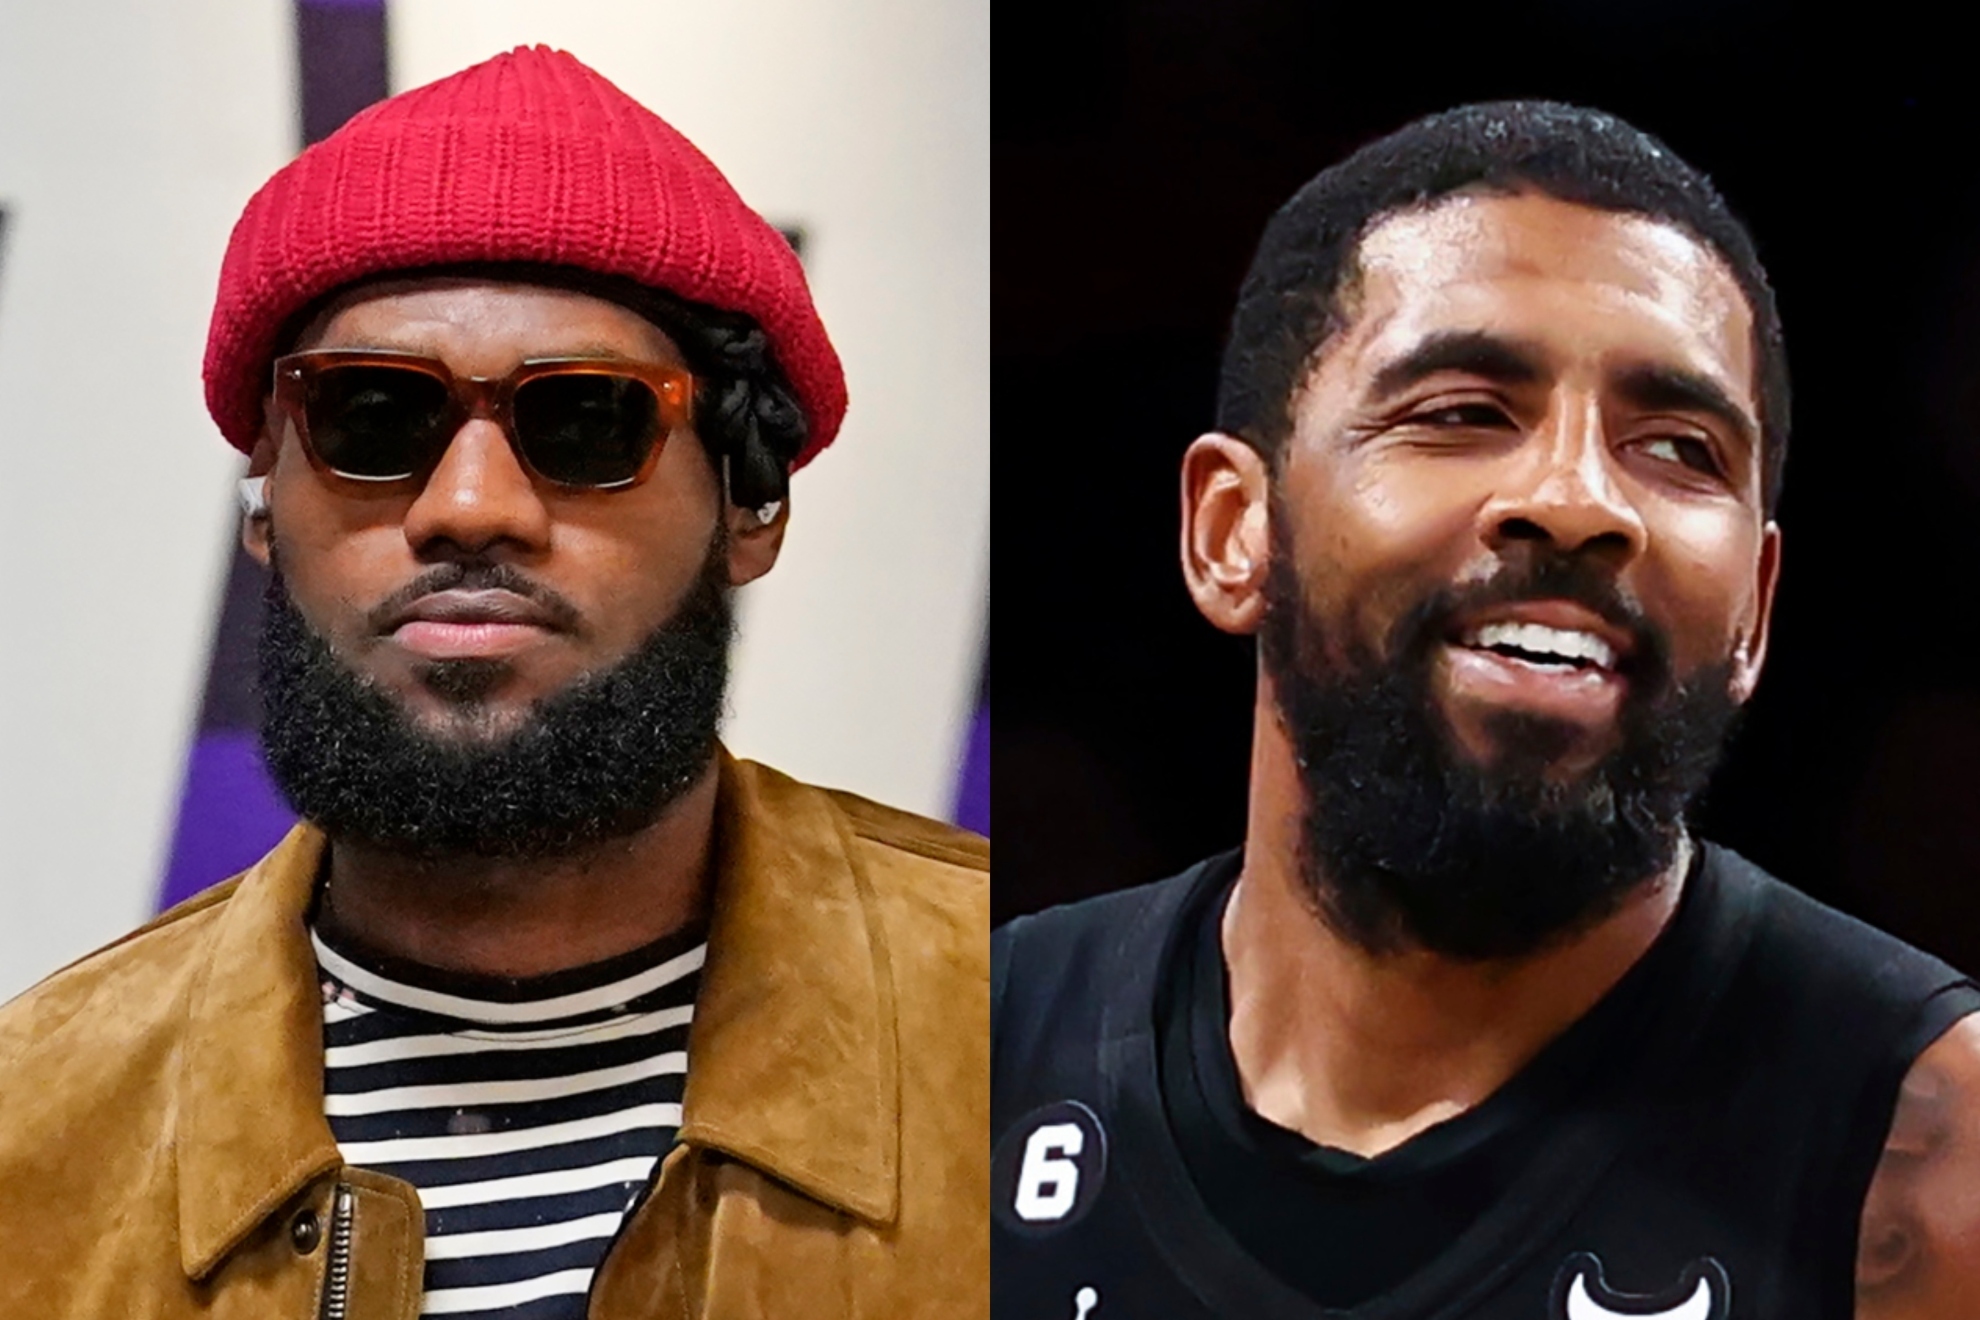 LeBron James says Kyrie's punishment was overkill